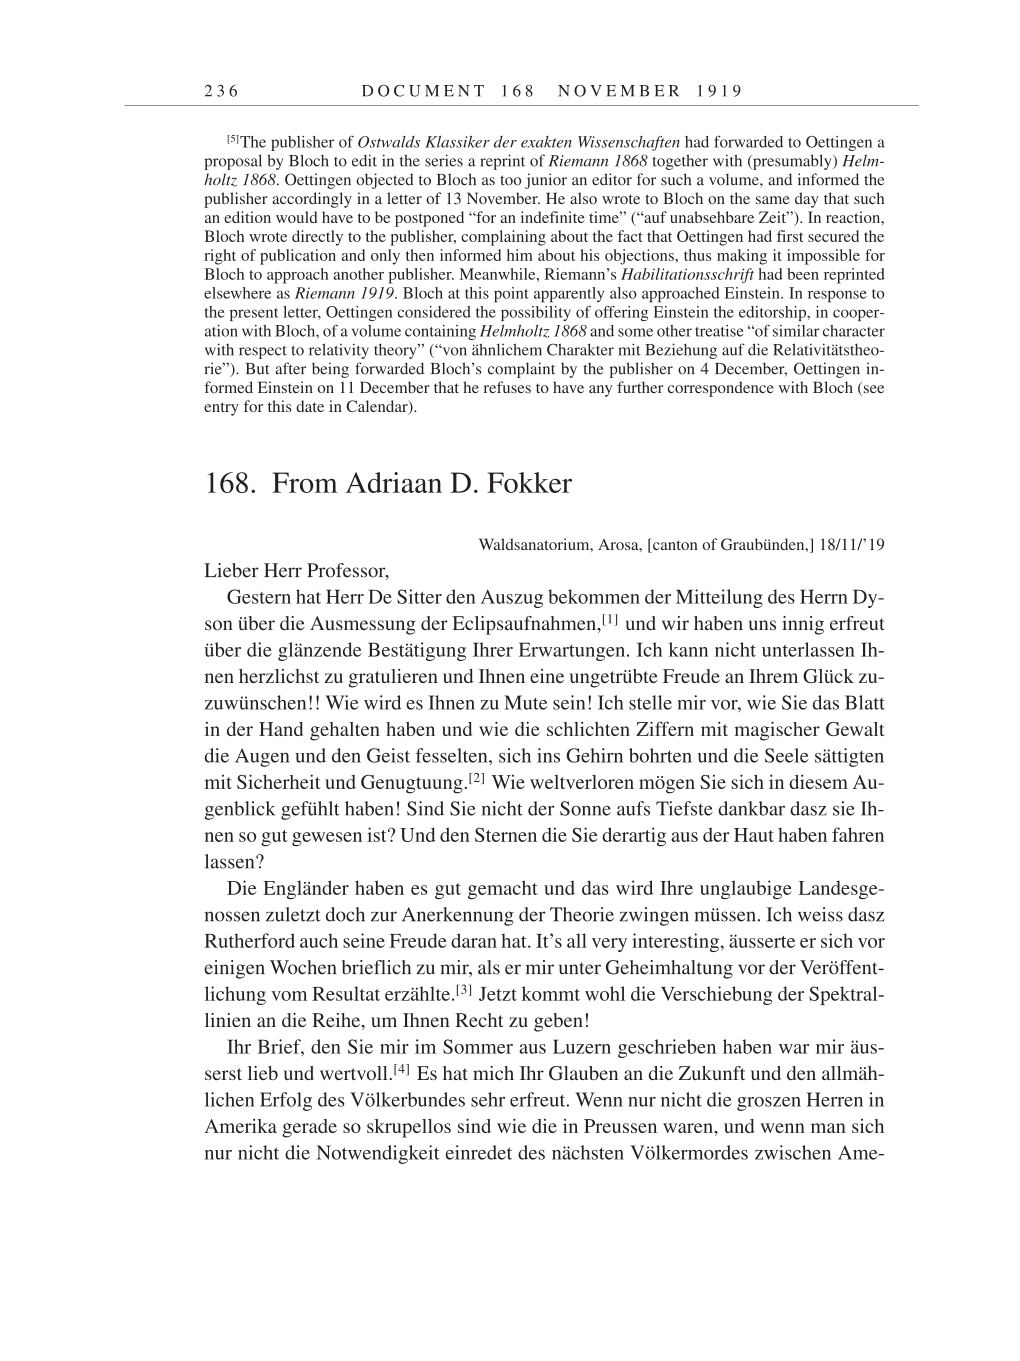 Volume 9: The Berlin Years: Correspondence January 1919-April 1920 page 236